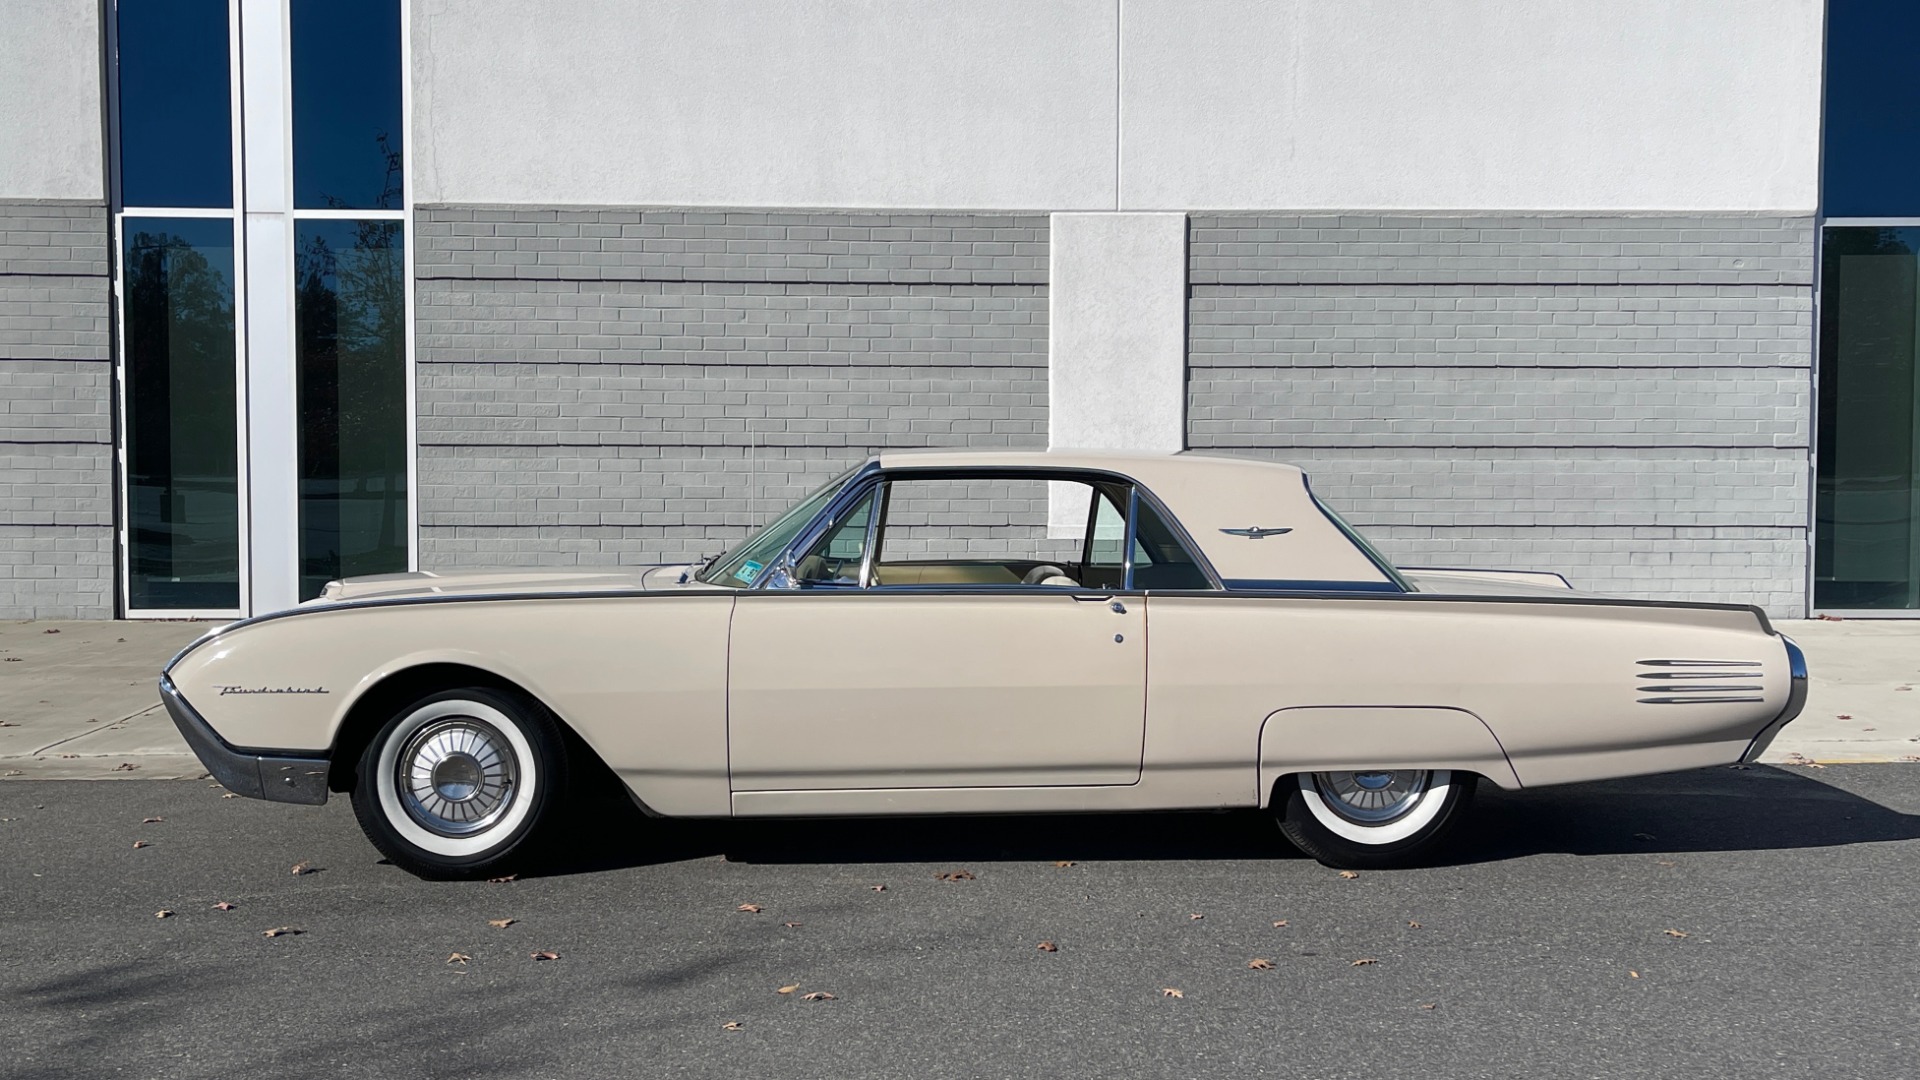 Used 1961 Ford THUNDERBIRD HARDTOP / 390CI V8 / AUTO TRANS / LOW MILEAGE SURVIVOR for sale $19,995 at Formula Imports in Charlotte NC 28227 7